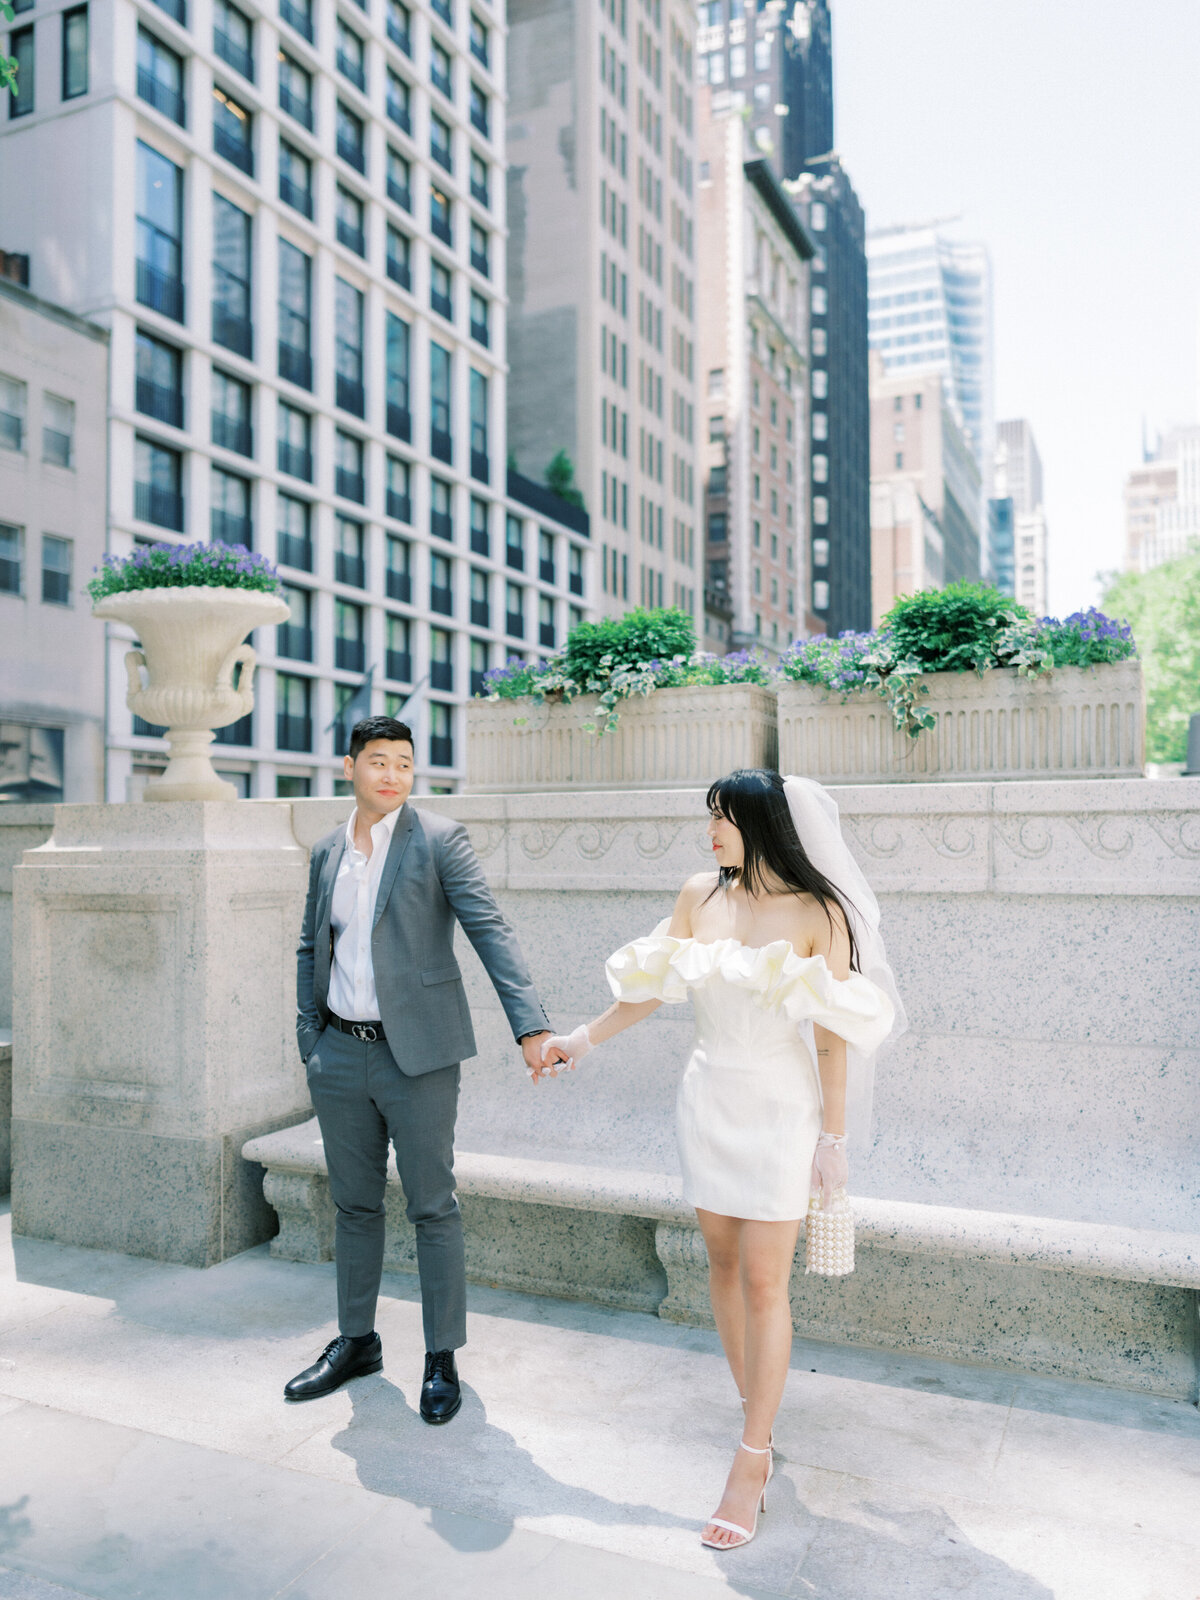 Vogue Editiorial NYC Elopement Themed Engagement Session Highlights | Amarachi Ikeji Photography 53